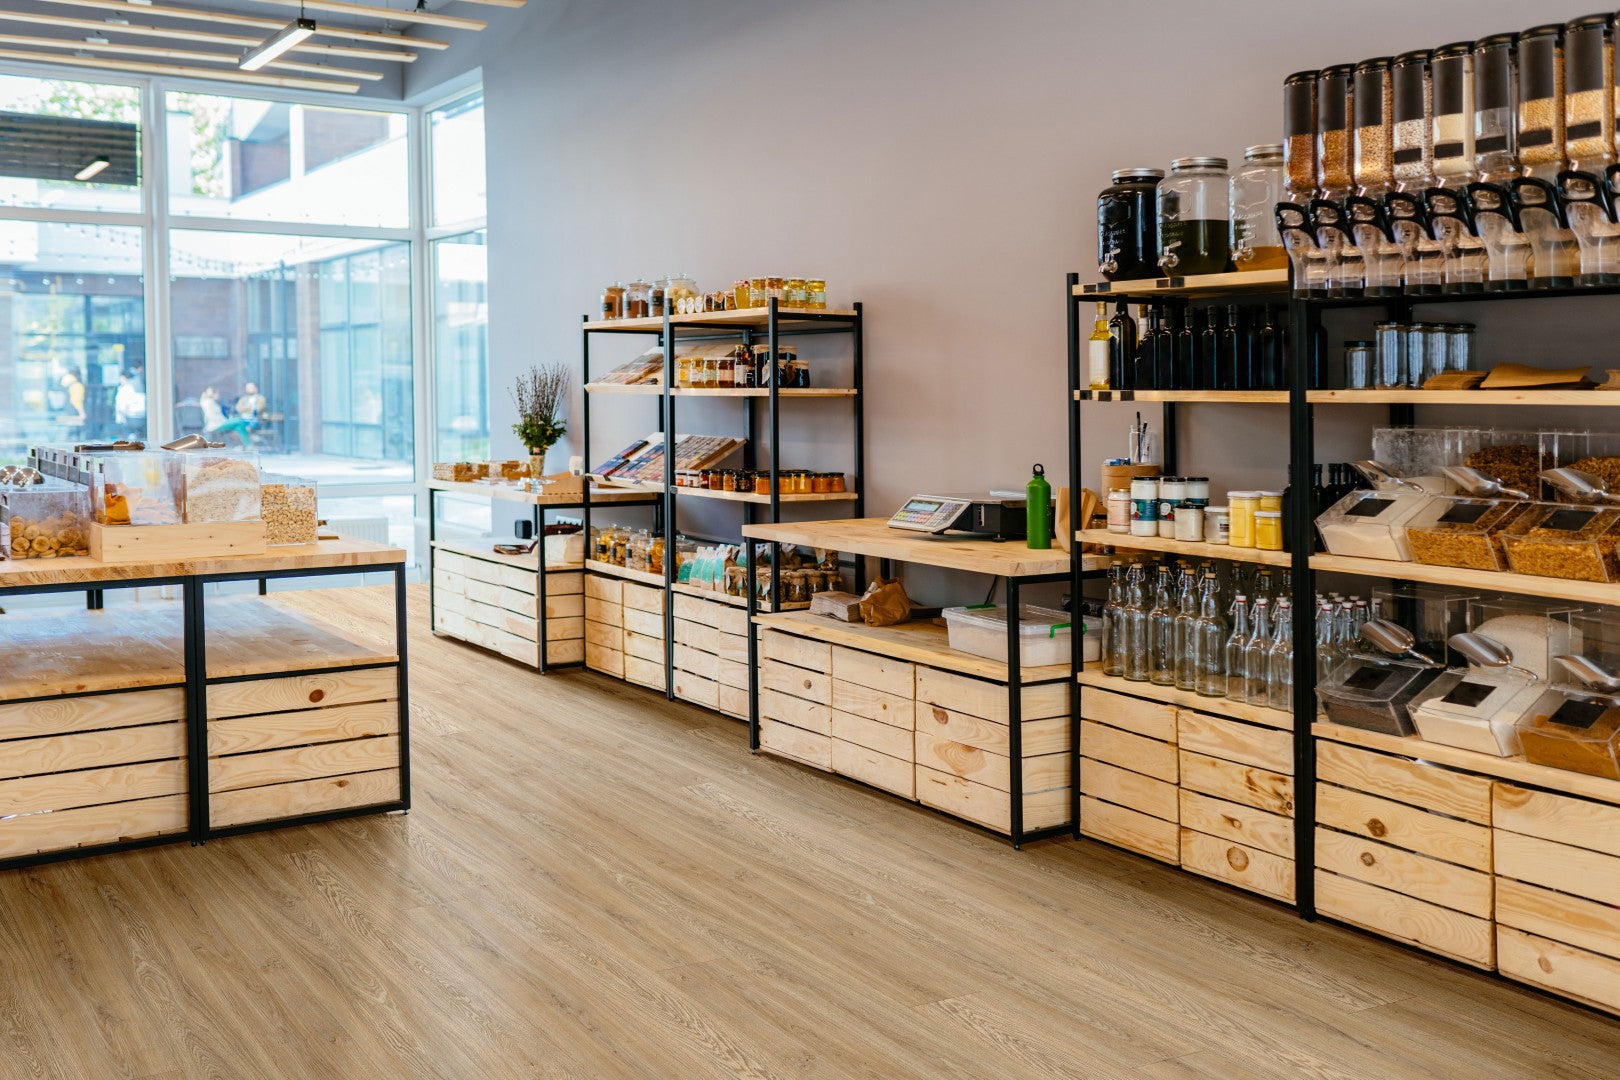 The Benefits of Choosing Durable and High-Quality Commercial Flooring